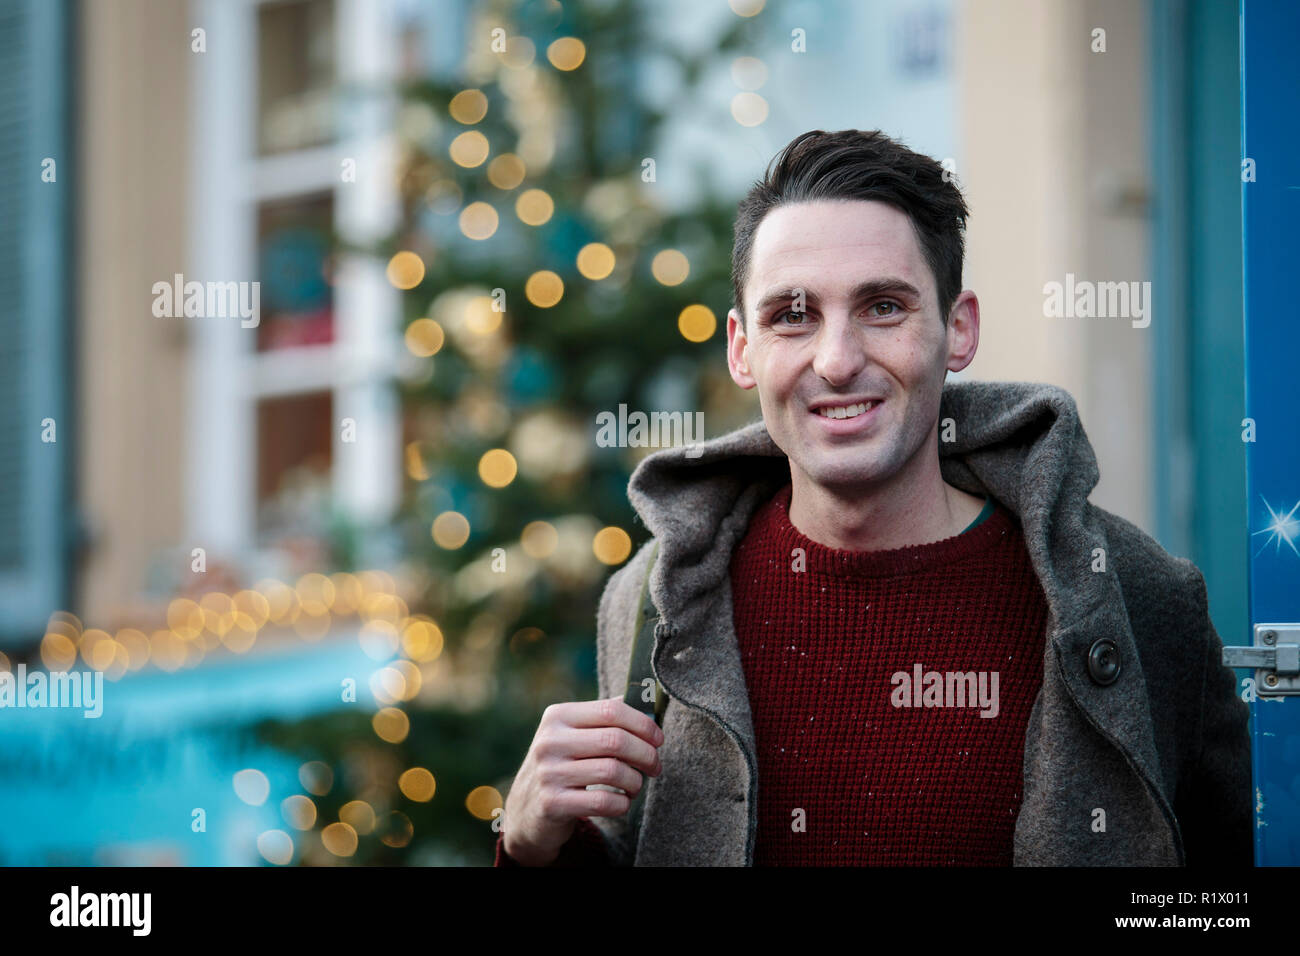 Outdoor Young man Winter Portrait walking in the city Stock Photo